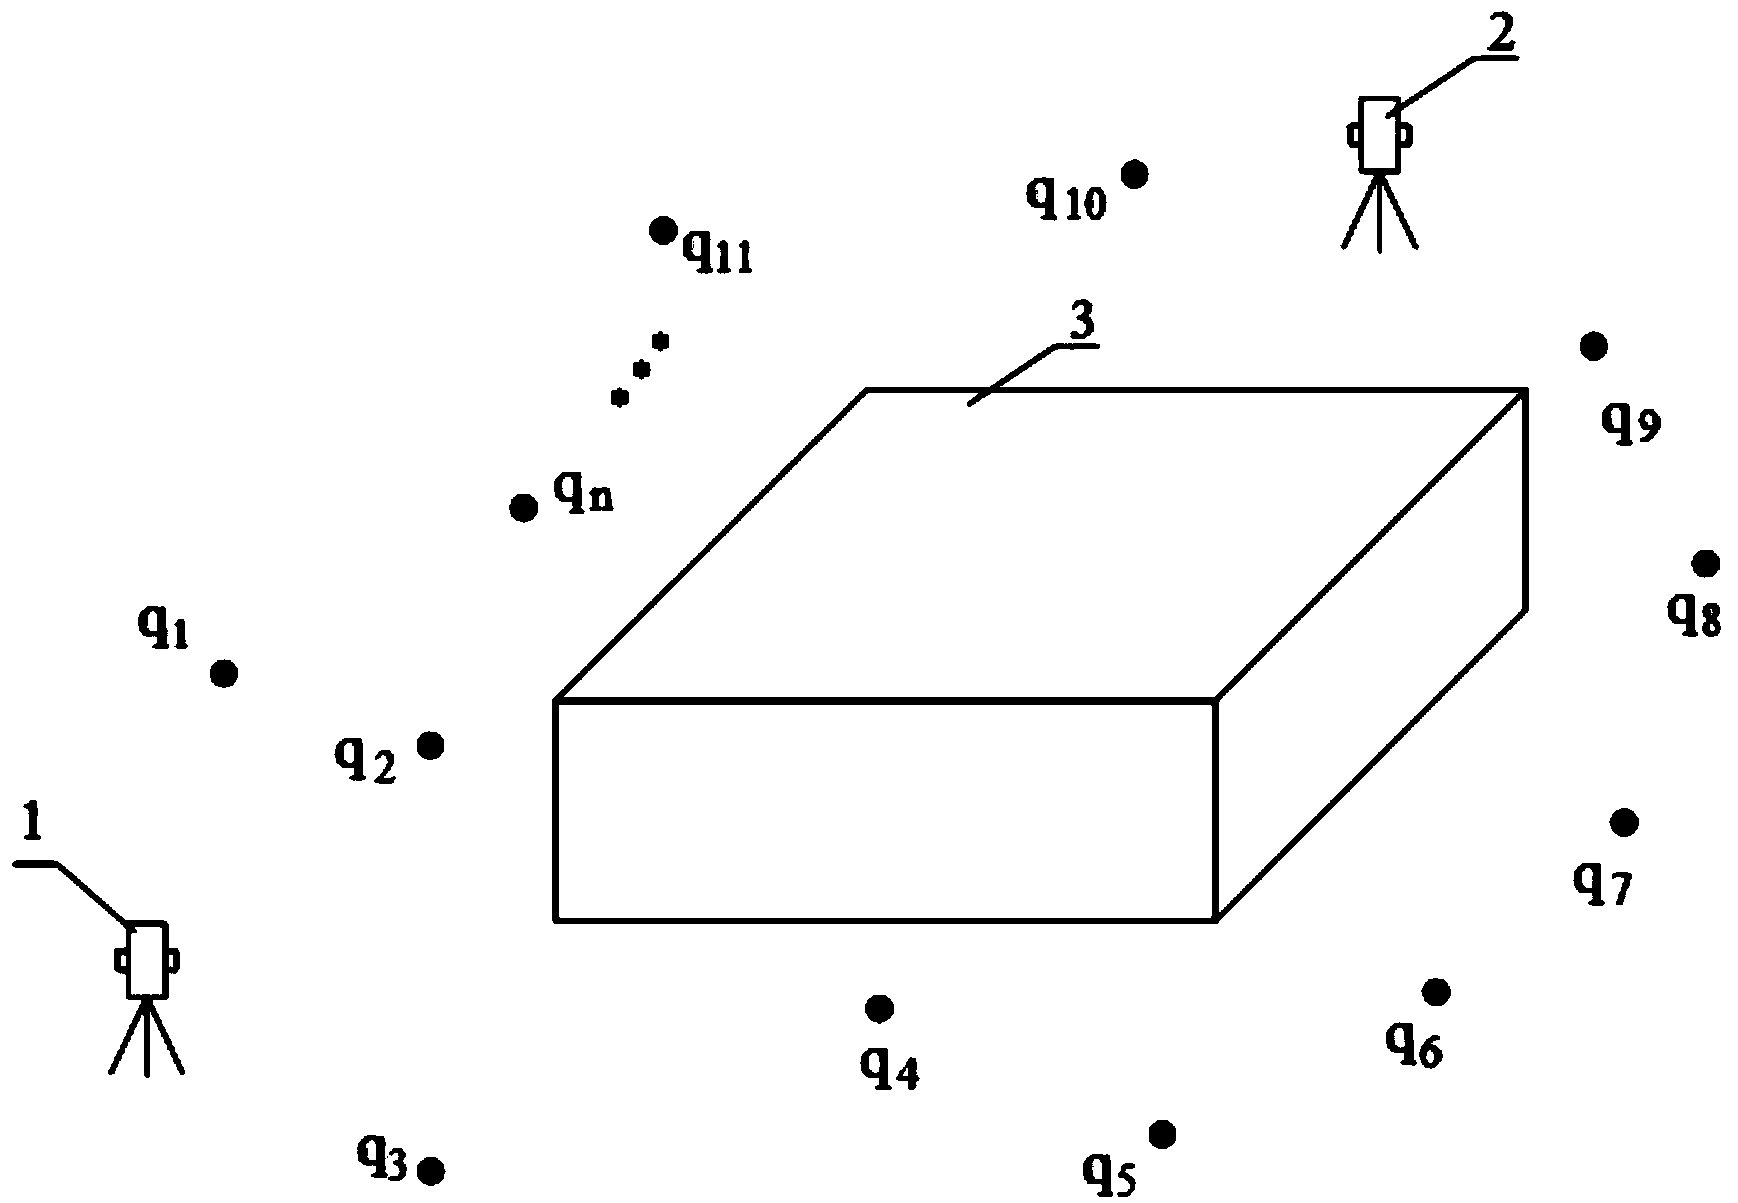 Total station networking measurement method of large-scale structural component